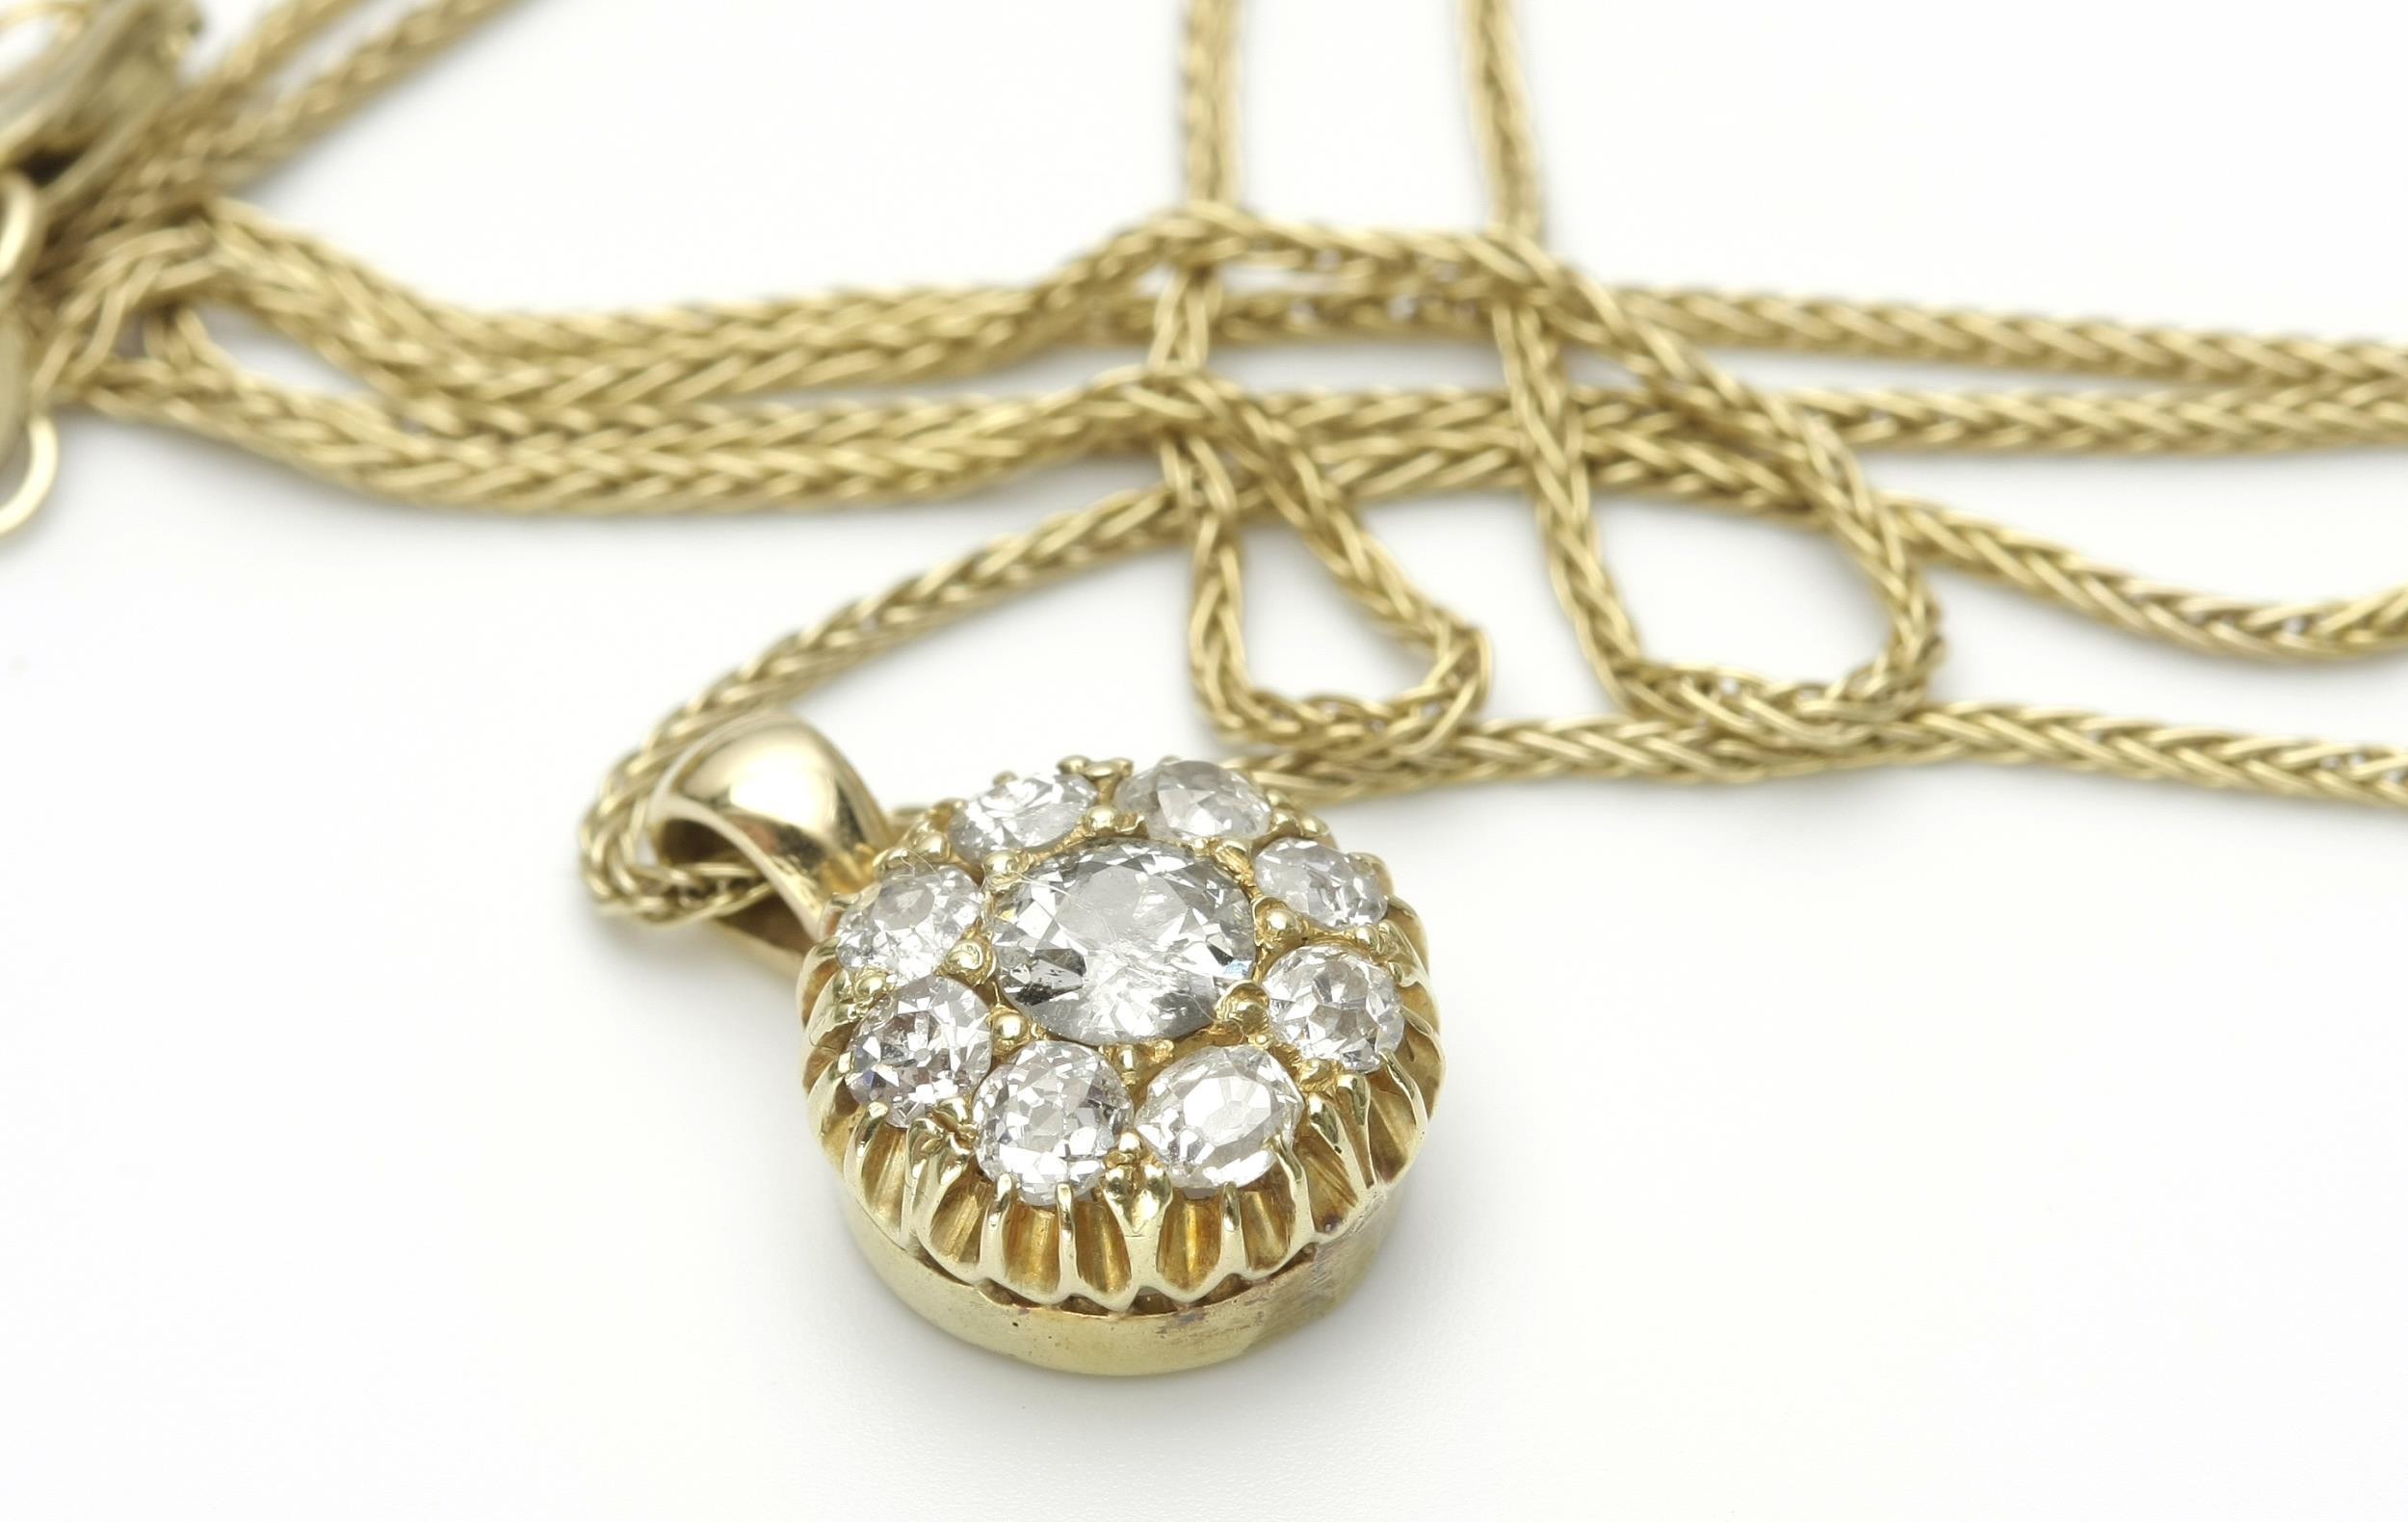 A SUITE OF VINTAGE DIAMOND JEWELLERY, 1.55 CARATS - Image 2 of 4